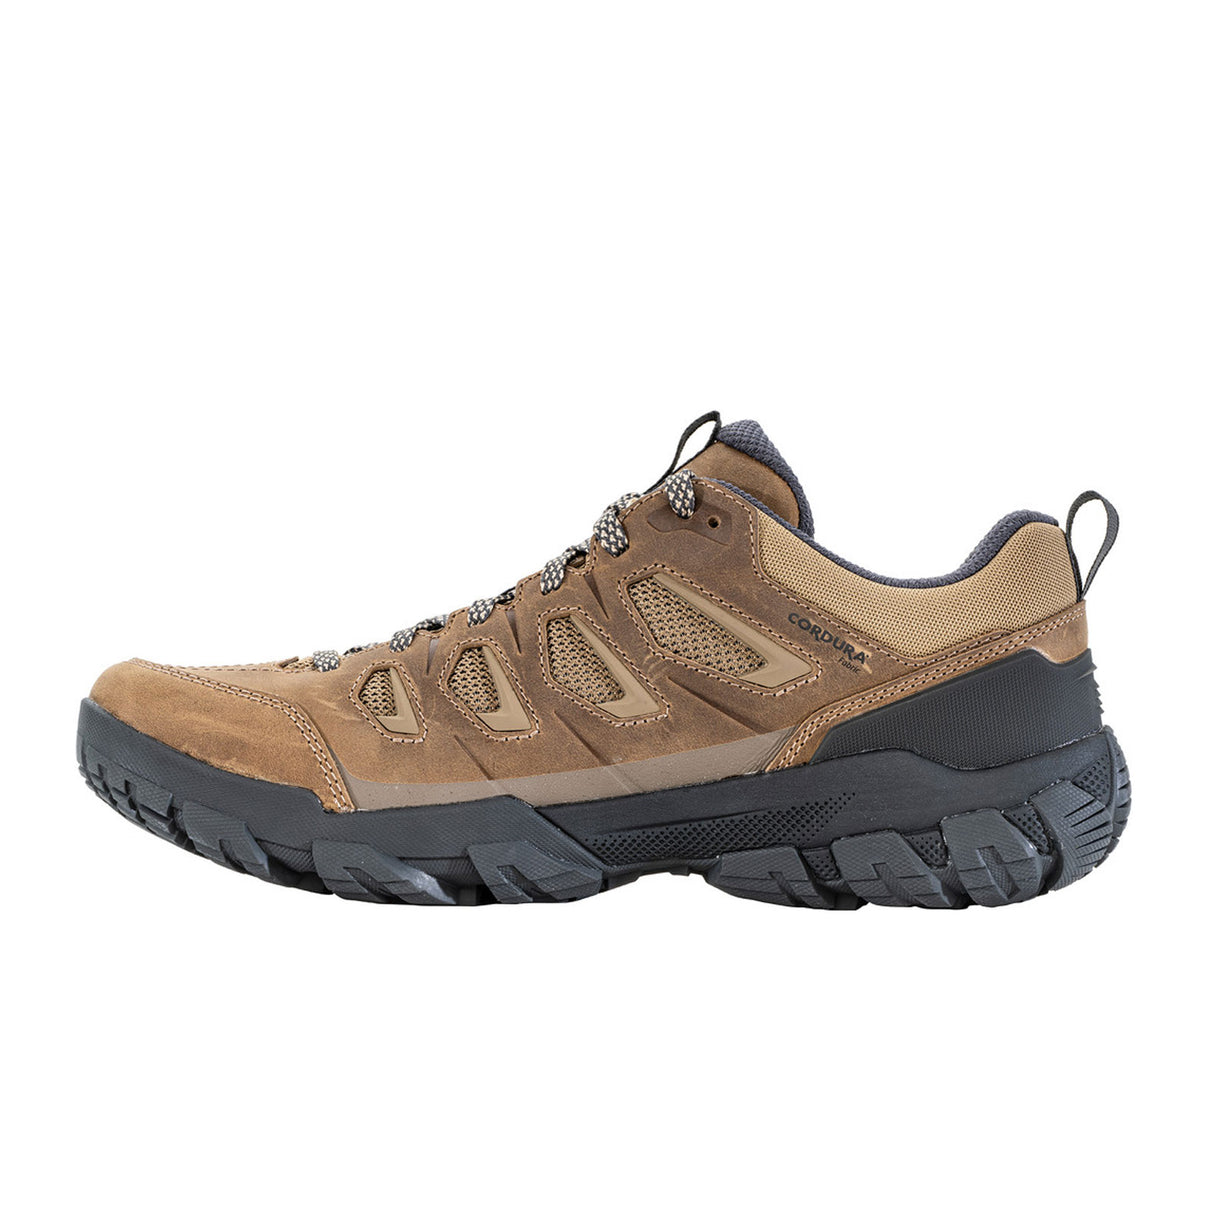 Oboz Sawtooth X Low Hiking Shoe (Men) - Sandhill Boots - Hiking - The Heel Shoe Fitters